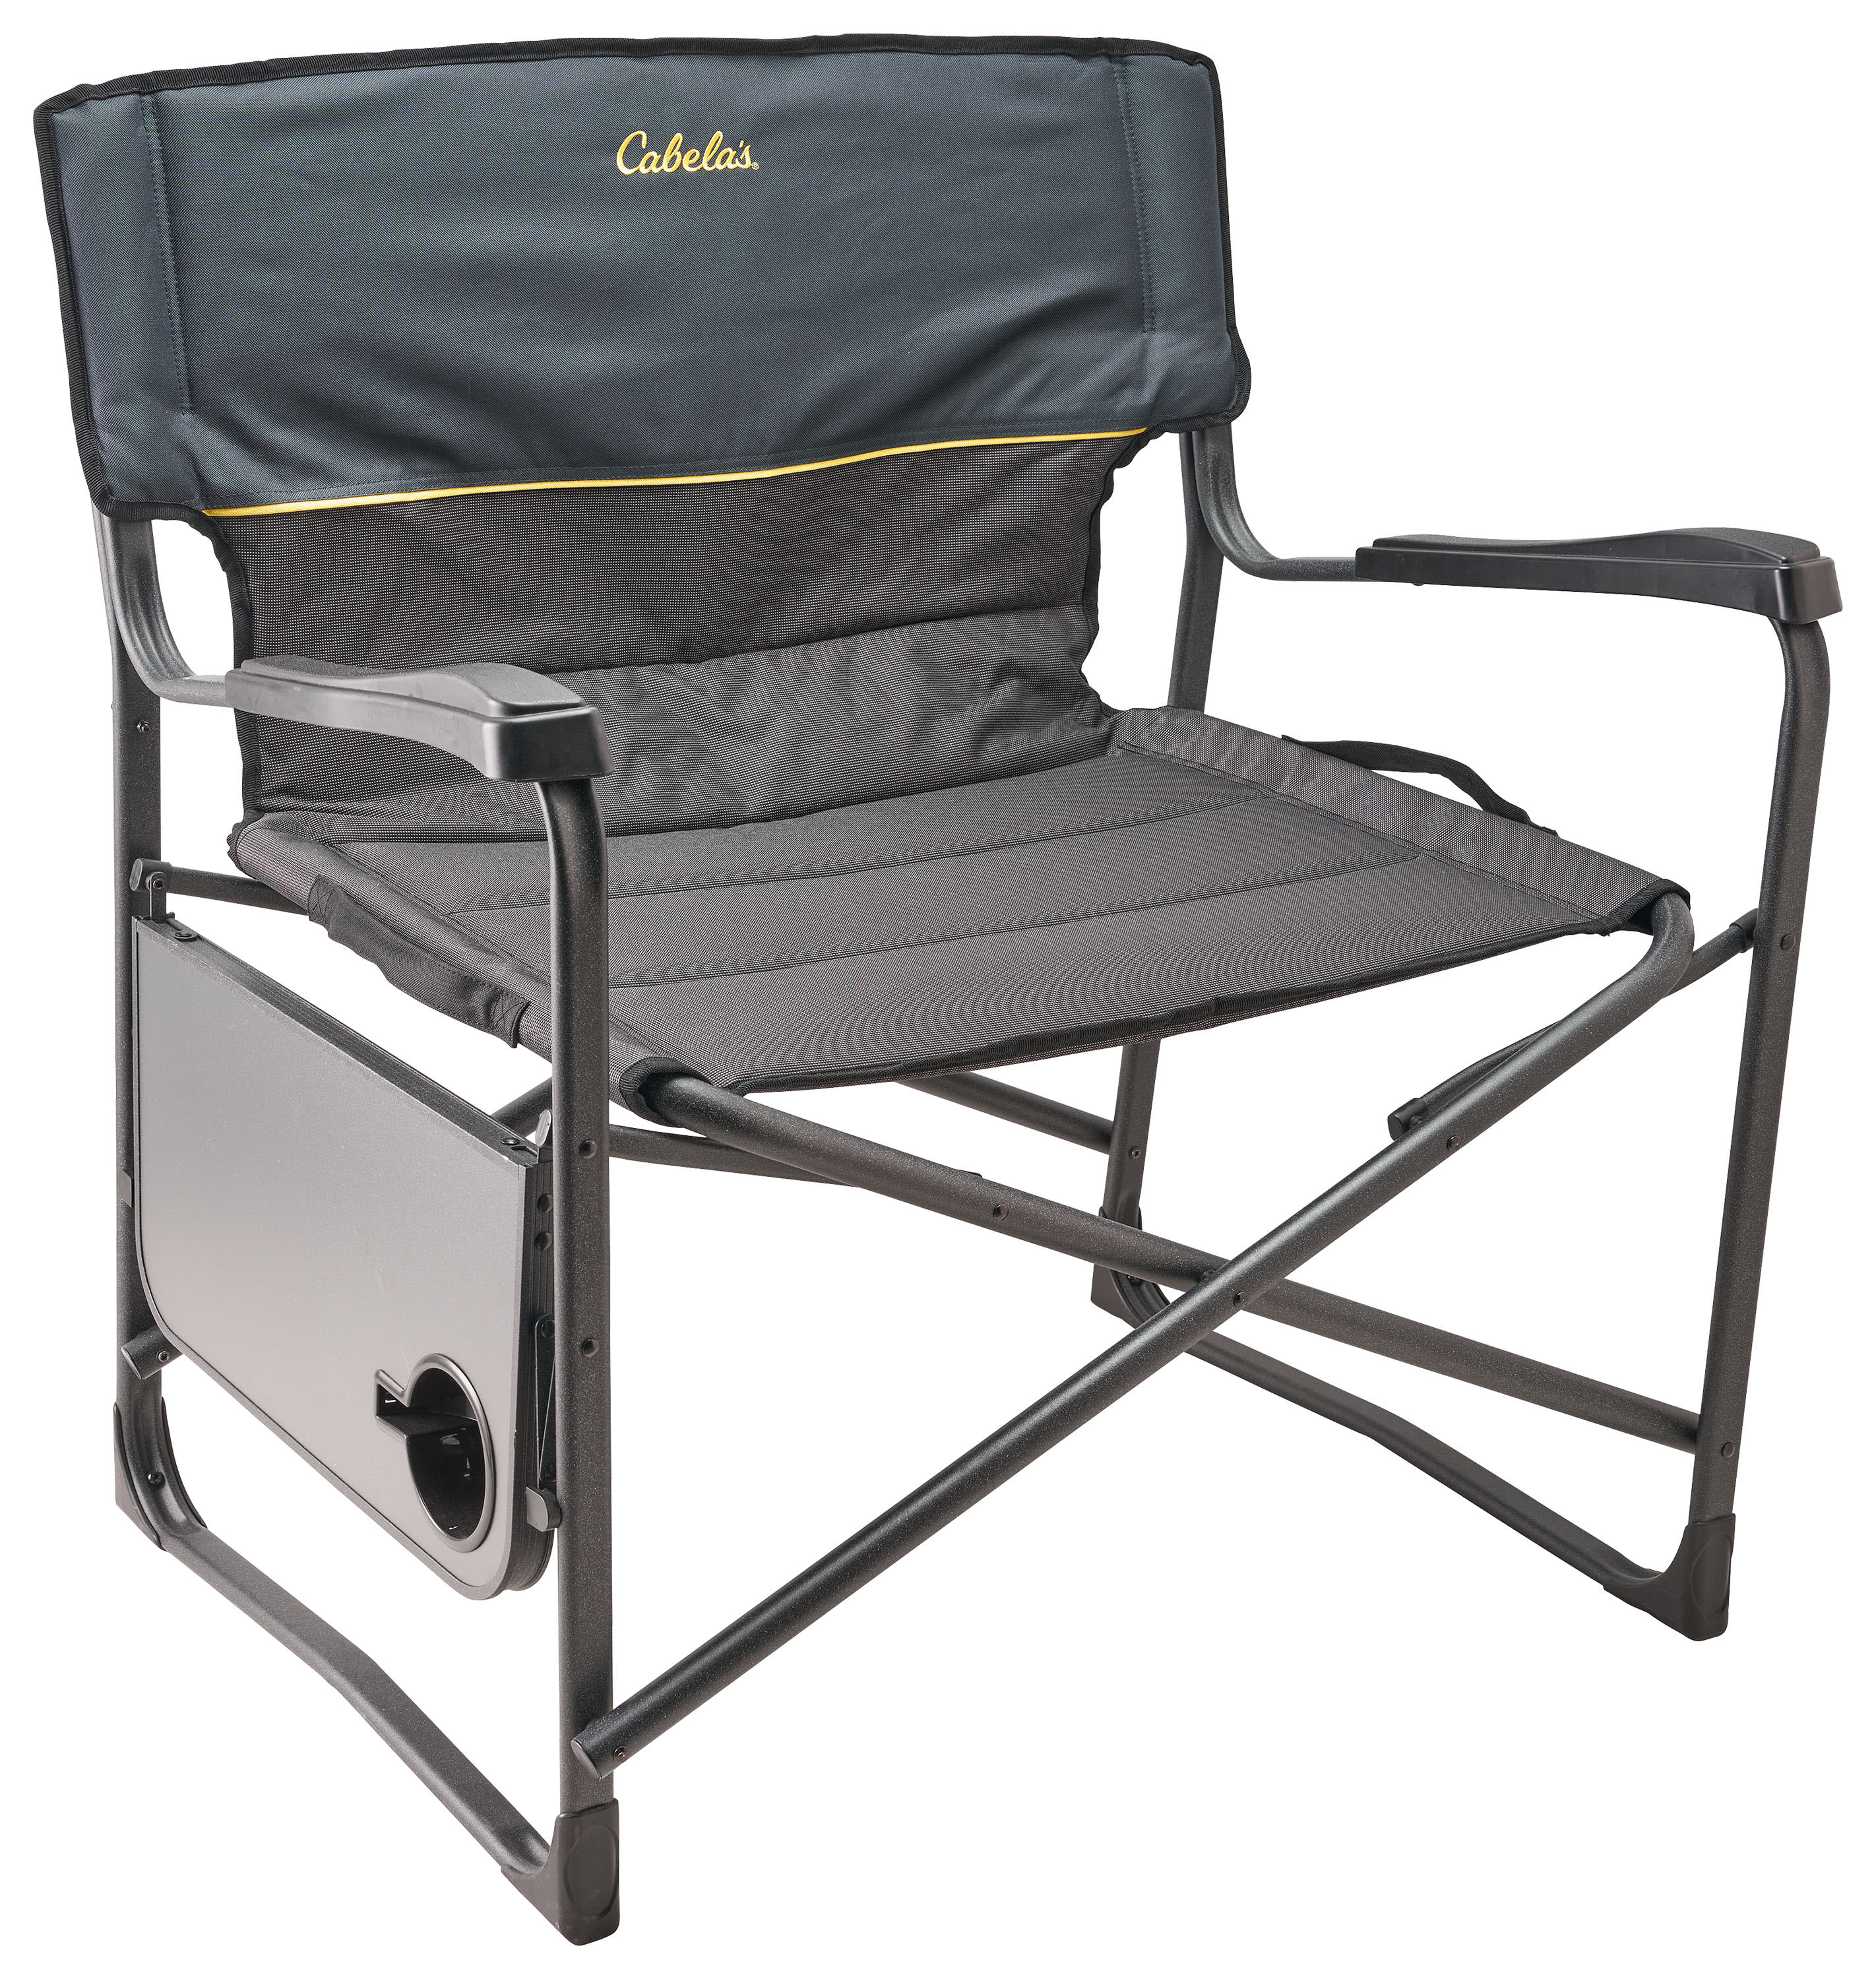 Cabela's® Big Outdoorsman Director's Chair with Side Table